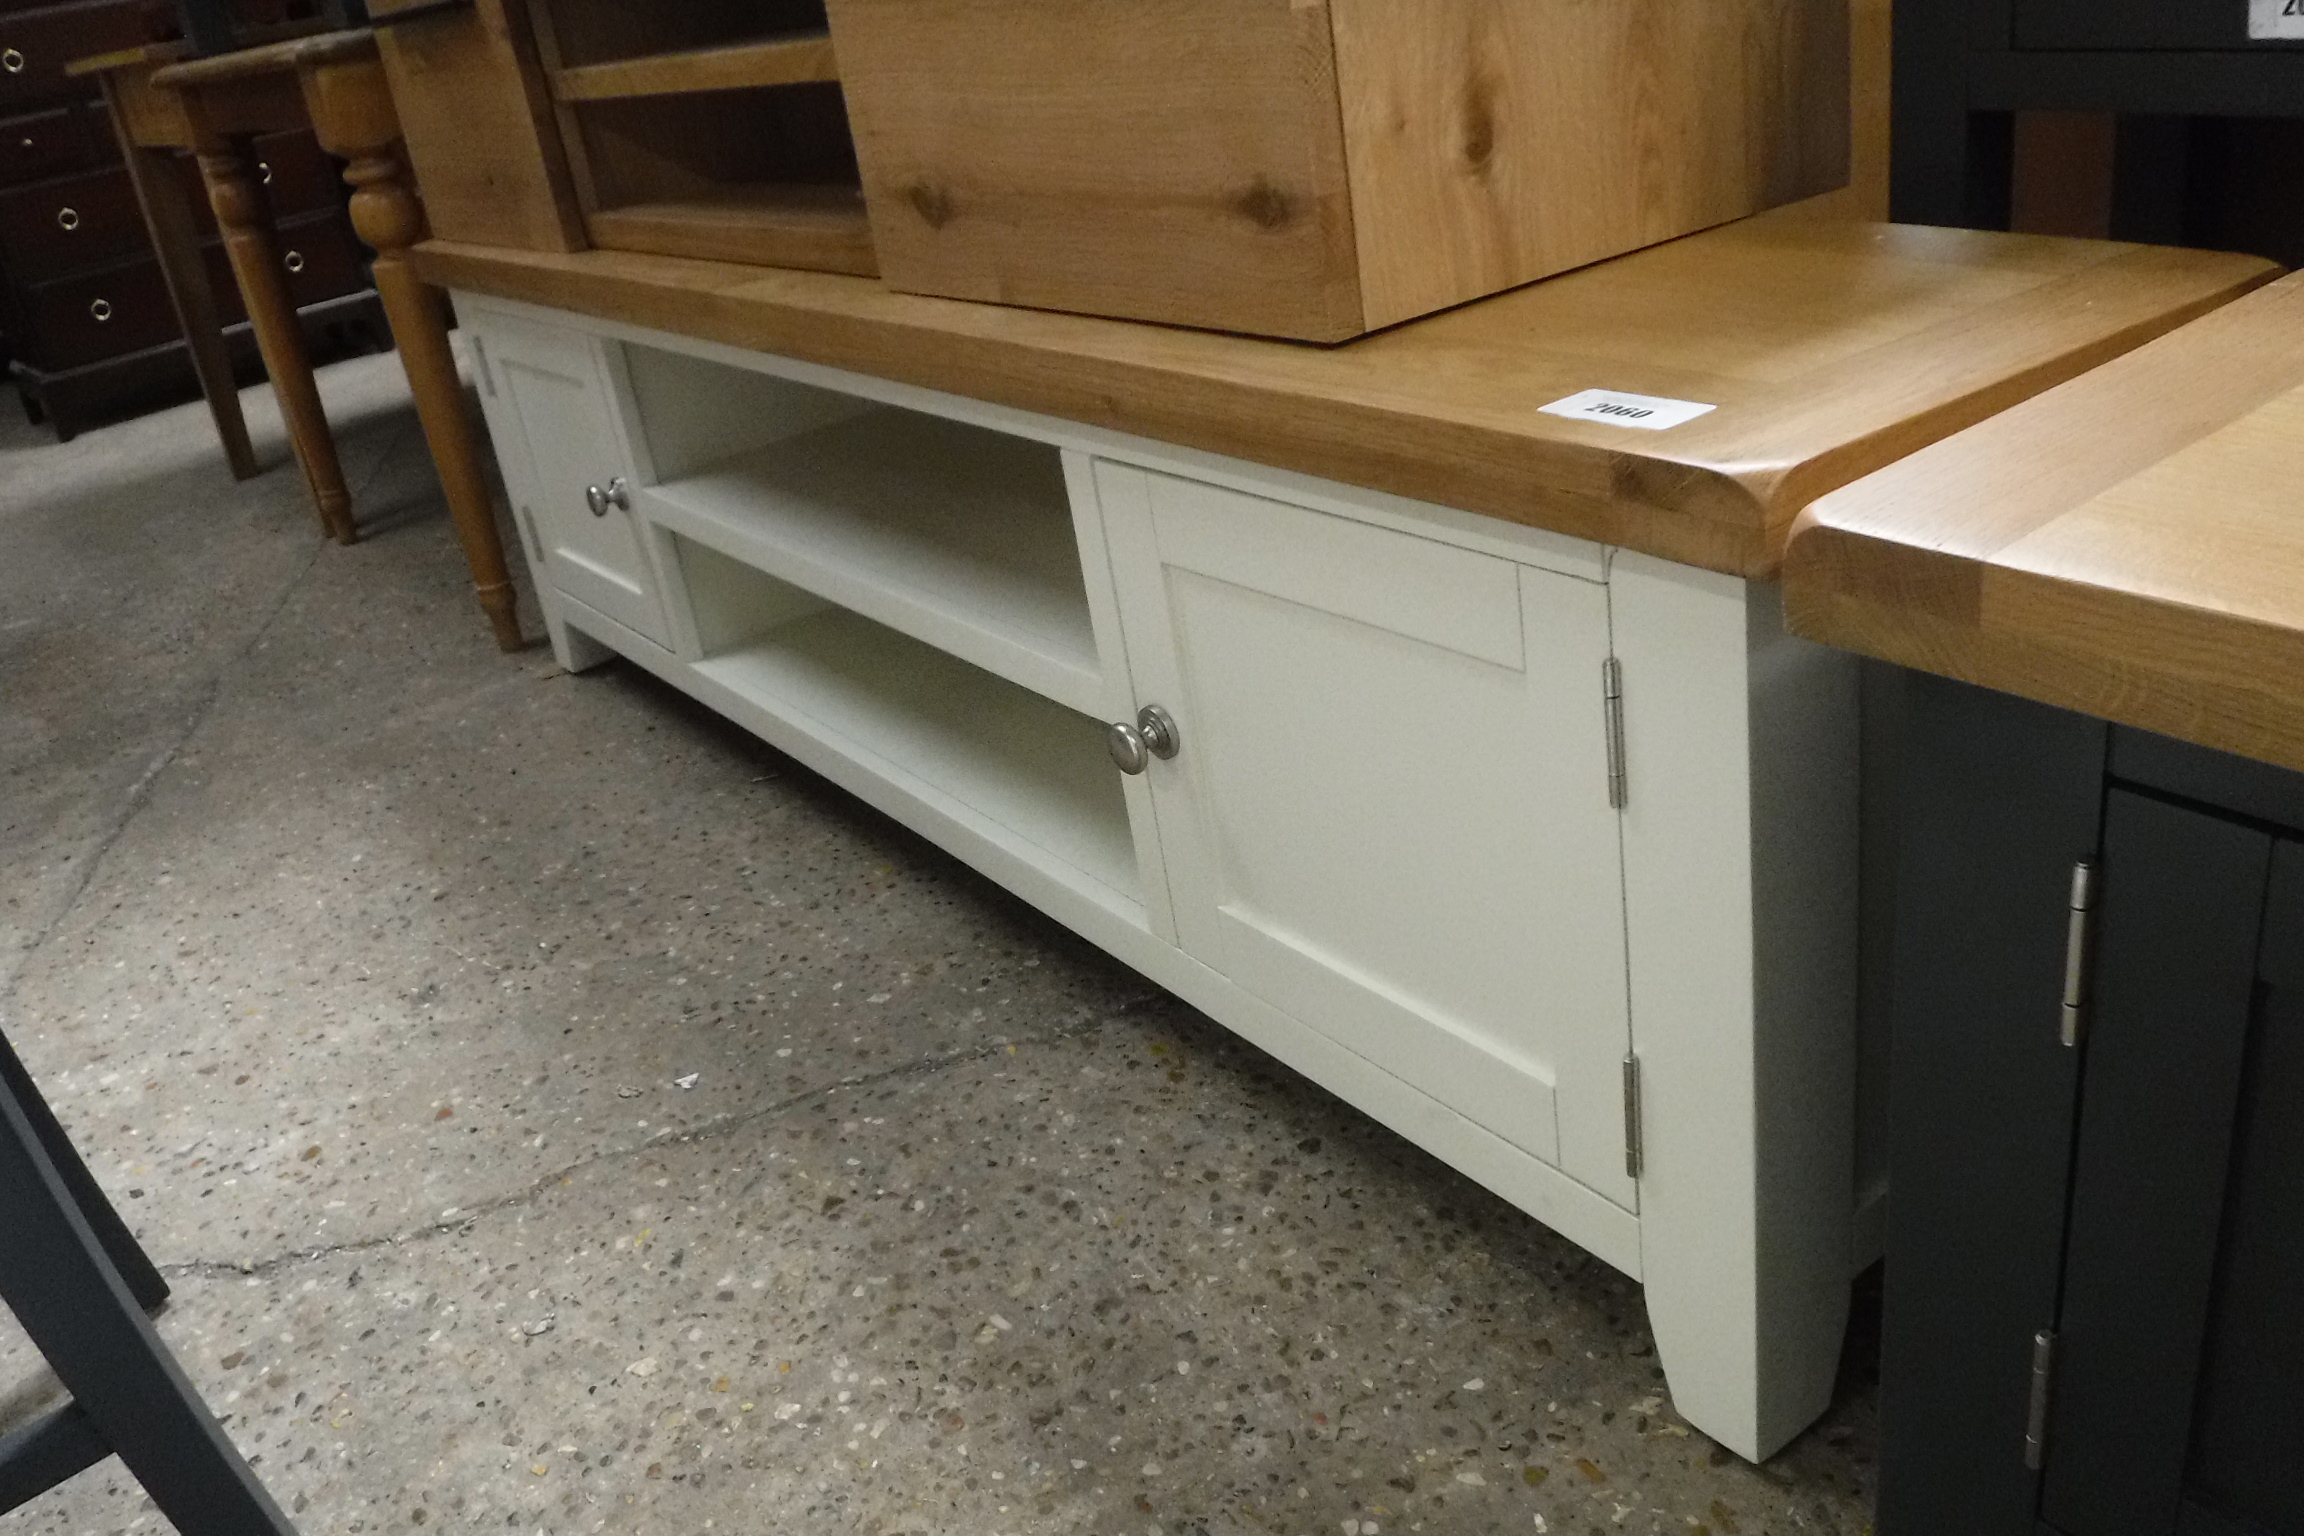 (10) Cream painted oak top large TV unit with 2 shelves and 2 cupboards, 180cm wide (A)